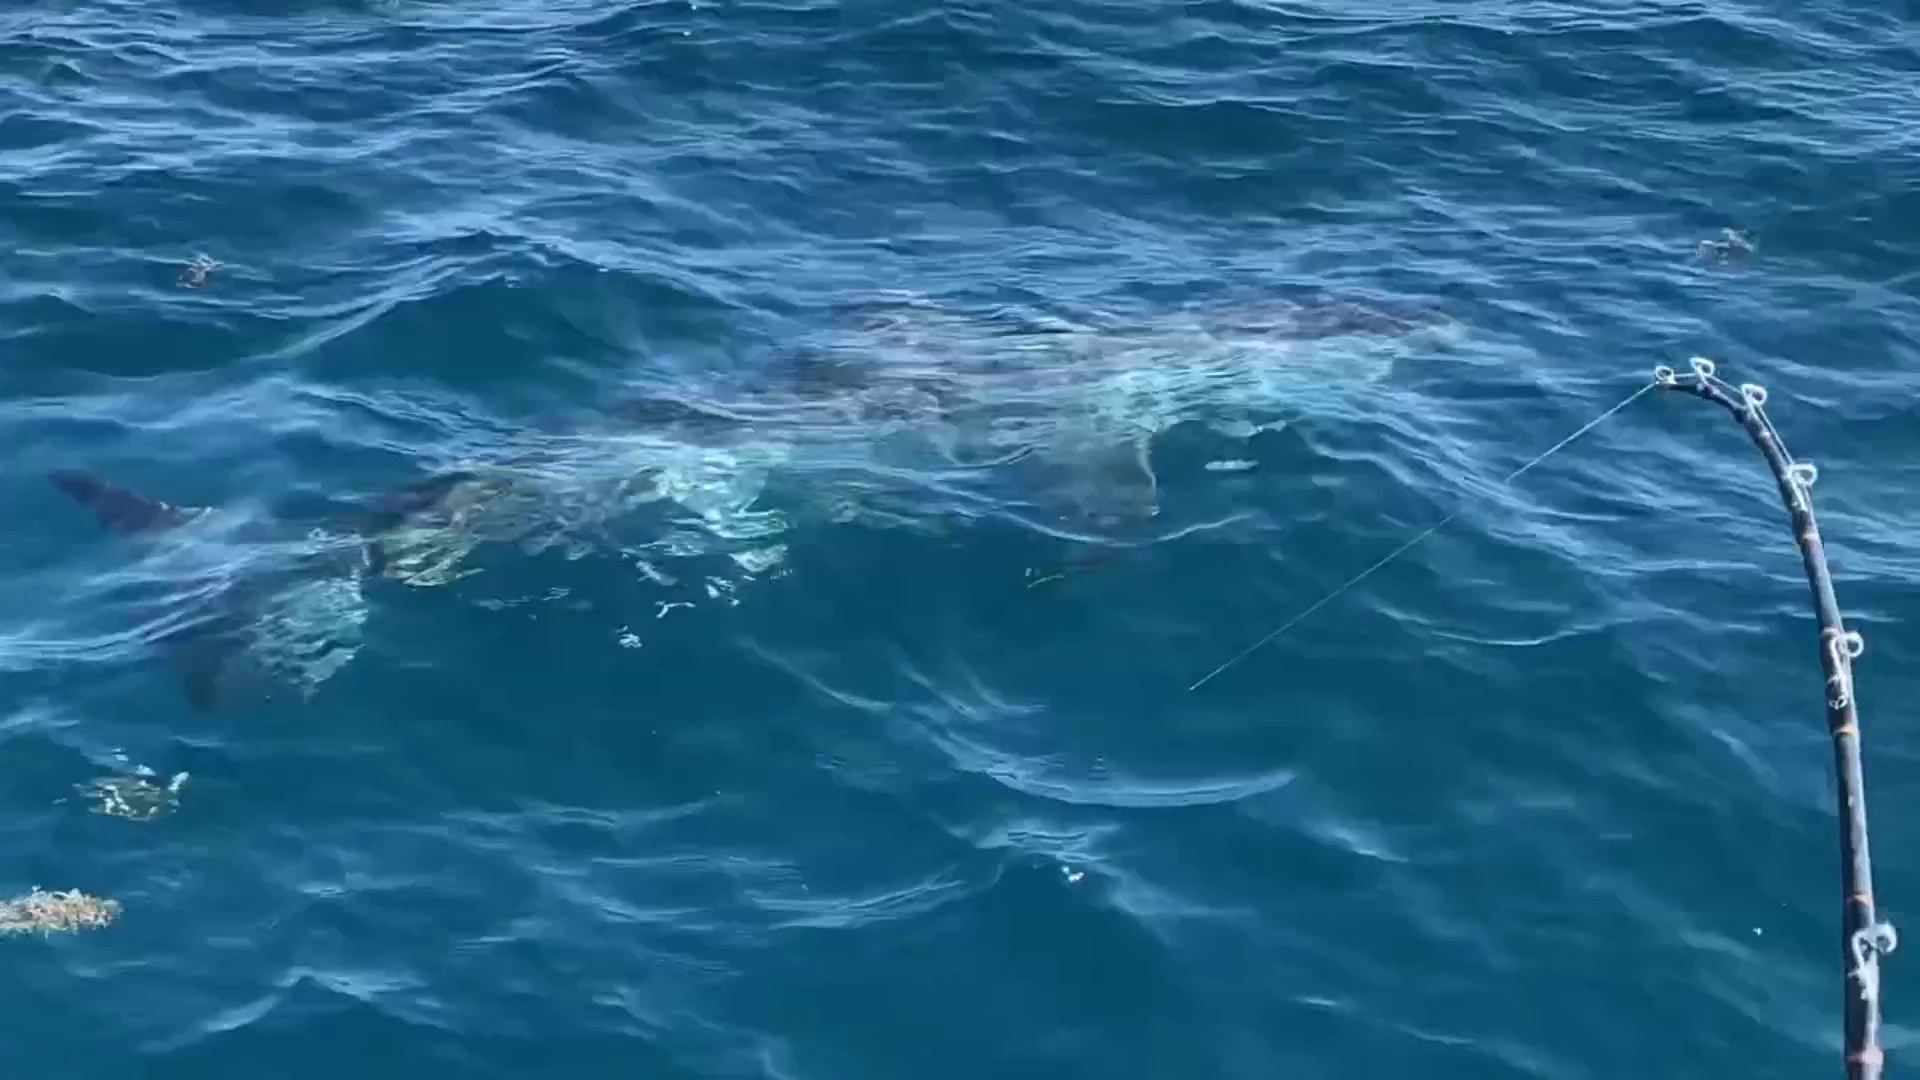 WHAT A CATCH: Video shows great white shark hooked near Ponce Inlet